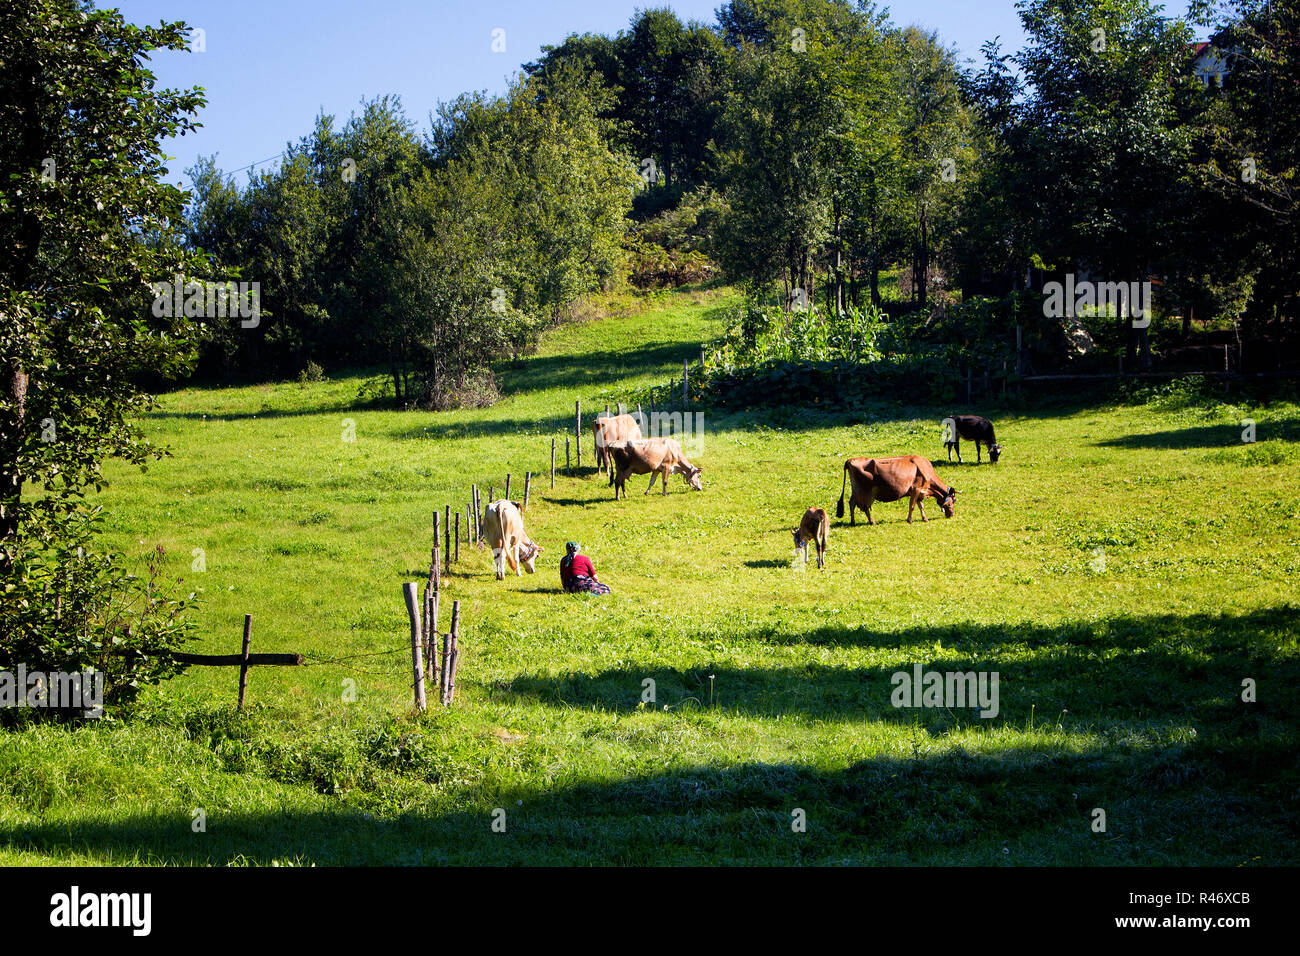 View of a traditional woman, cows, trees and grass field at high plateau reflecting culture. The image is captured in Trabzon/Rize area of Black Sea r Stock Photo